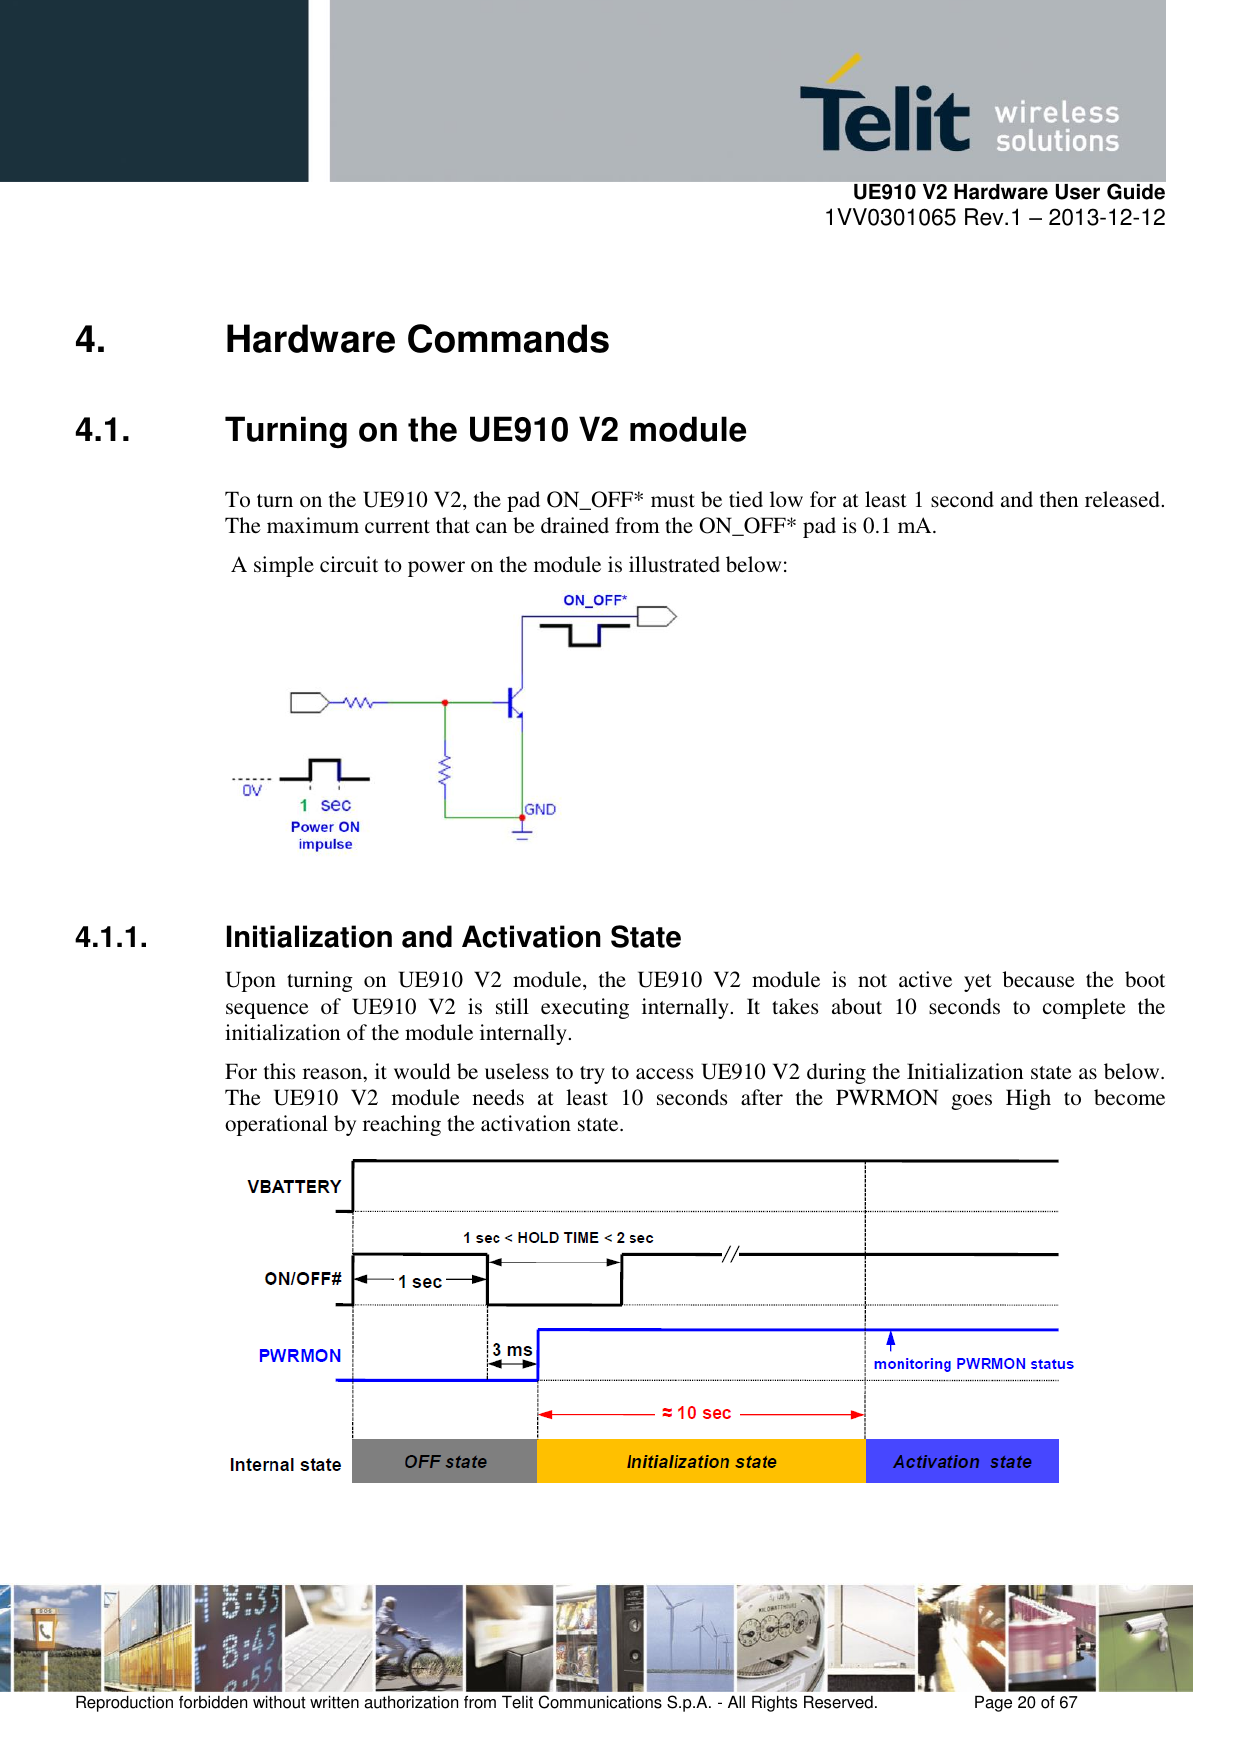     UE910 V2 Hardware User Guide 1VV0301065 Rev.1 – 2013-12-12  Reproduction forbidden without written authorization from Telit Communications S.p.A. - All Rights Reserved.    Page 20 of 67                                                     4.  Hardware Commands 4.1.  Turning on the UE910 V2 module To turn on the UE910 V2, the pad ON_OFF* must be tied low for at least 1 second and then released. The maximum current that can be drained from the ON_OFF* pad is 0.1 mA.  A simple circuit to power on the module is illustrated below:    4.1.1.  Initialization and Activation State Upon  turning  on  UE910  V2  module,  the  UE910  V2  module  is  not  active  yet  because  the  boot sequence  of  UE910  V2  is  still  executing  internally.  It  takes  about  10  seconds  to  complete  the initialization of the module internally. For this reason, it would be useless to try to access UE910 V2 during the Initialization state as below. The  UE910  V2  module  needs  at  least  10  seconds  after  the  PWRMON  goes  High  to  become operational by reaching the activation state.   